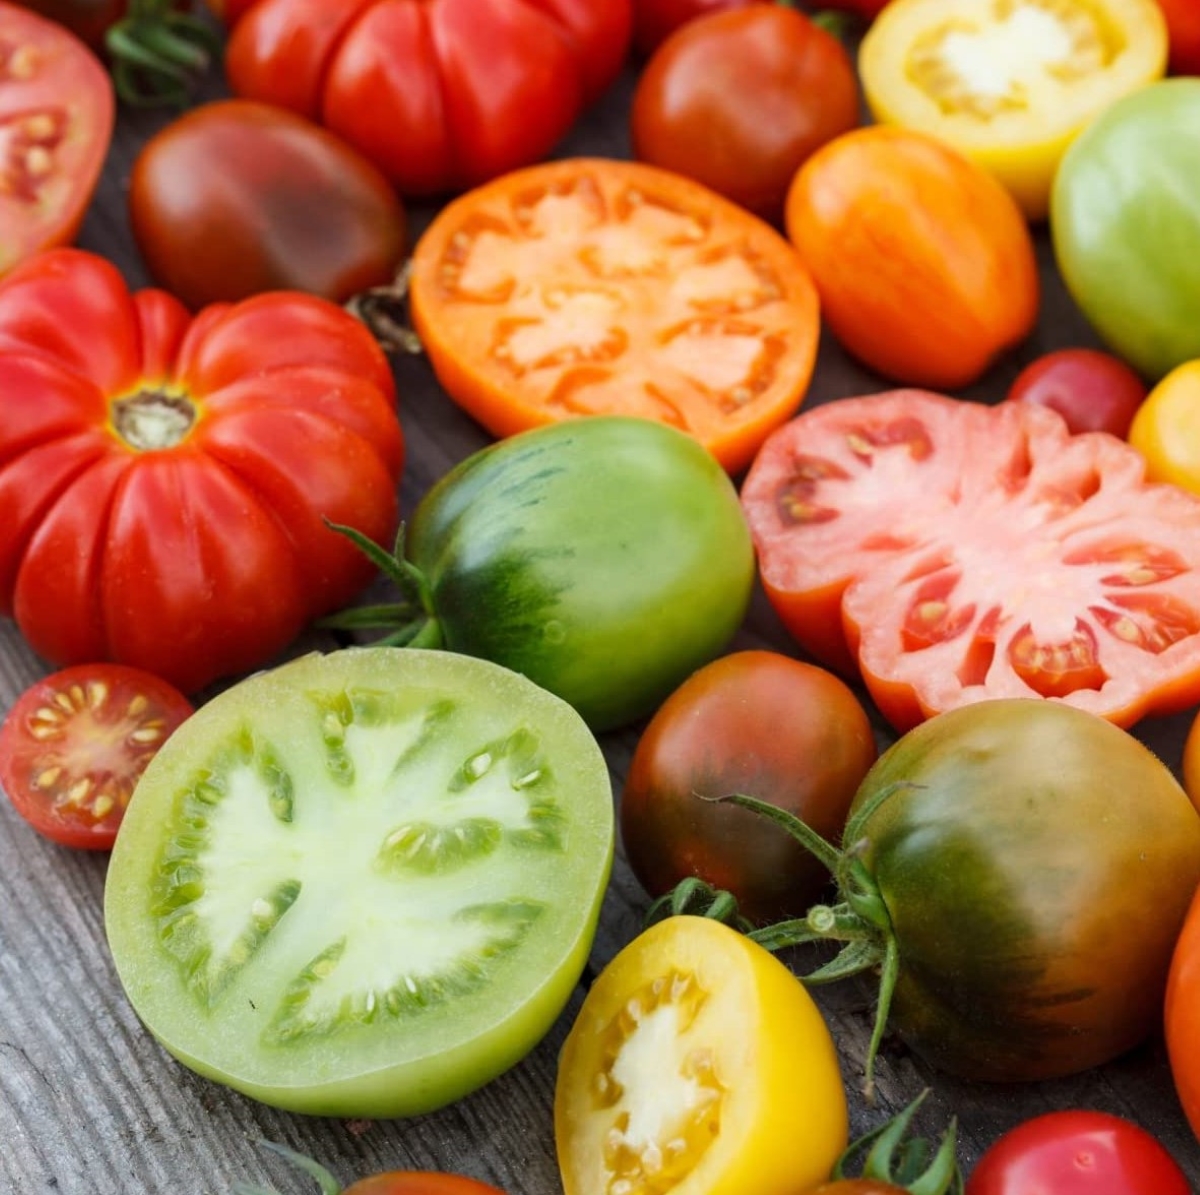 types of tomatoes - variety of different colored tomatoes